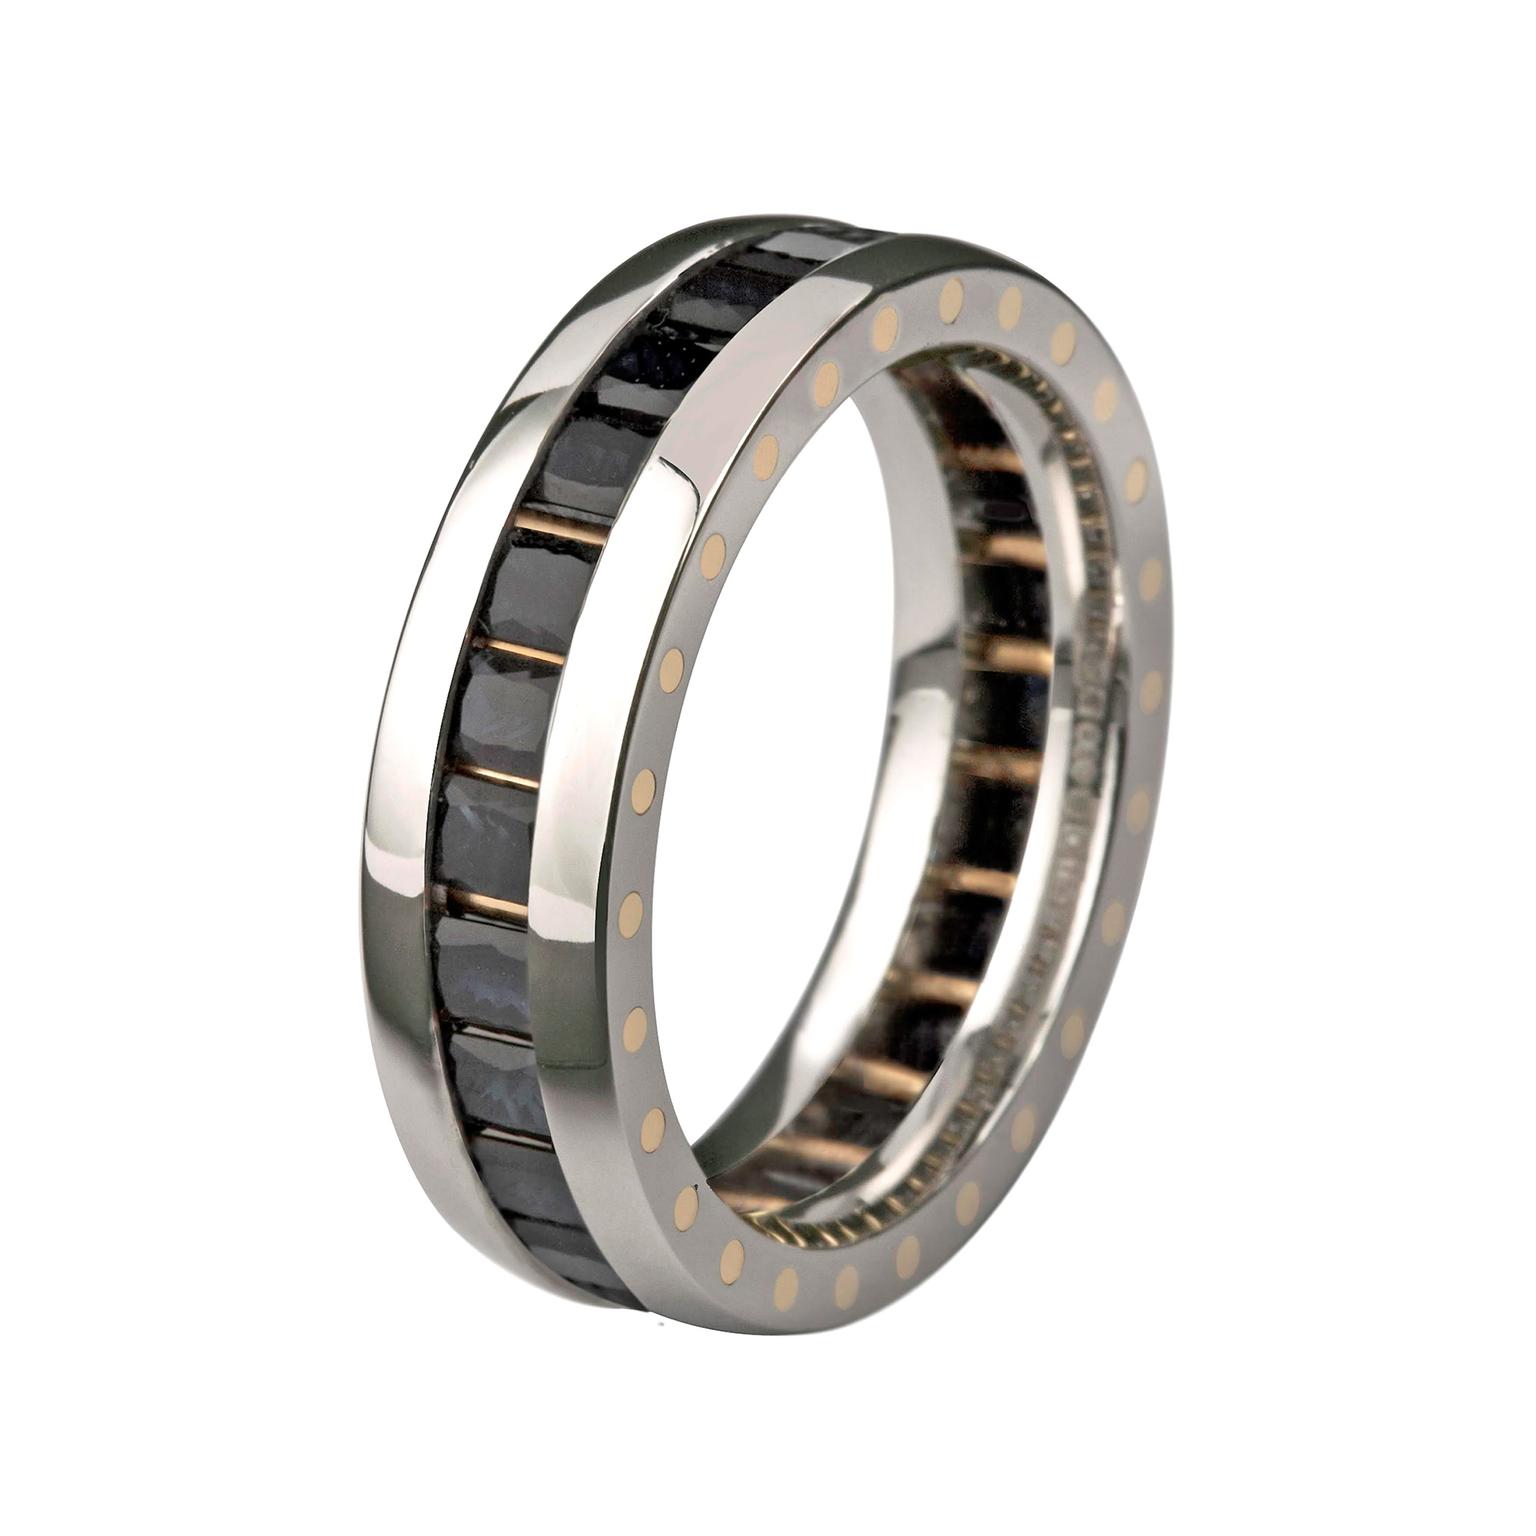 Love wins: the best wedding bands for same-sex couples